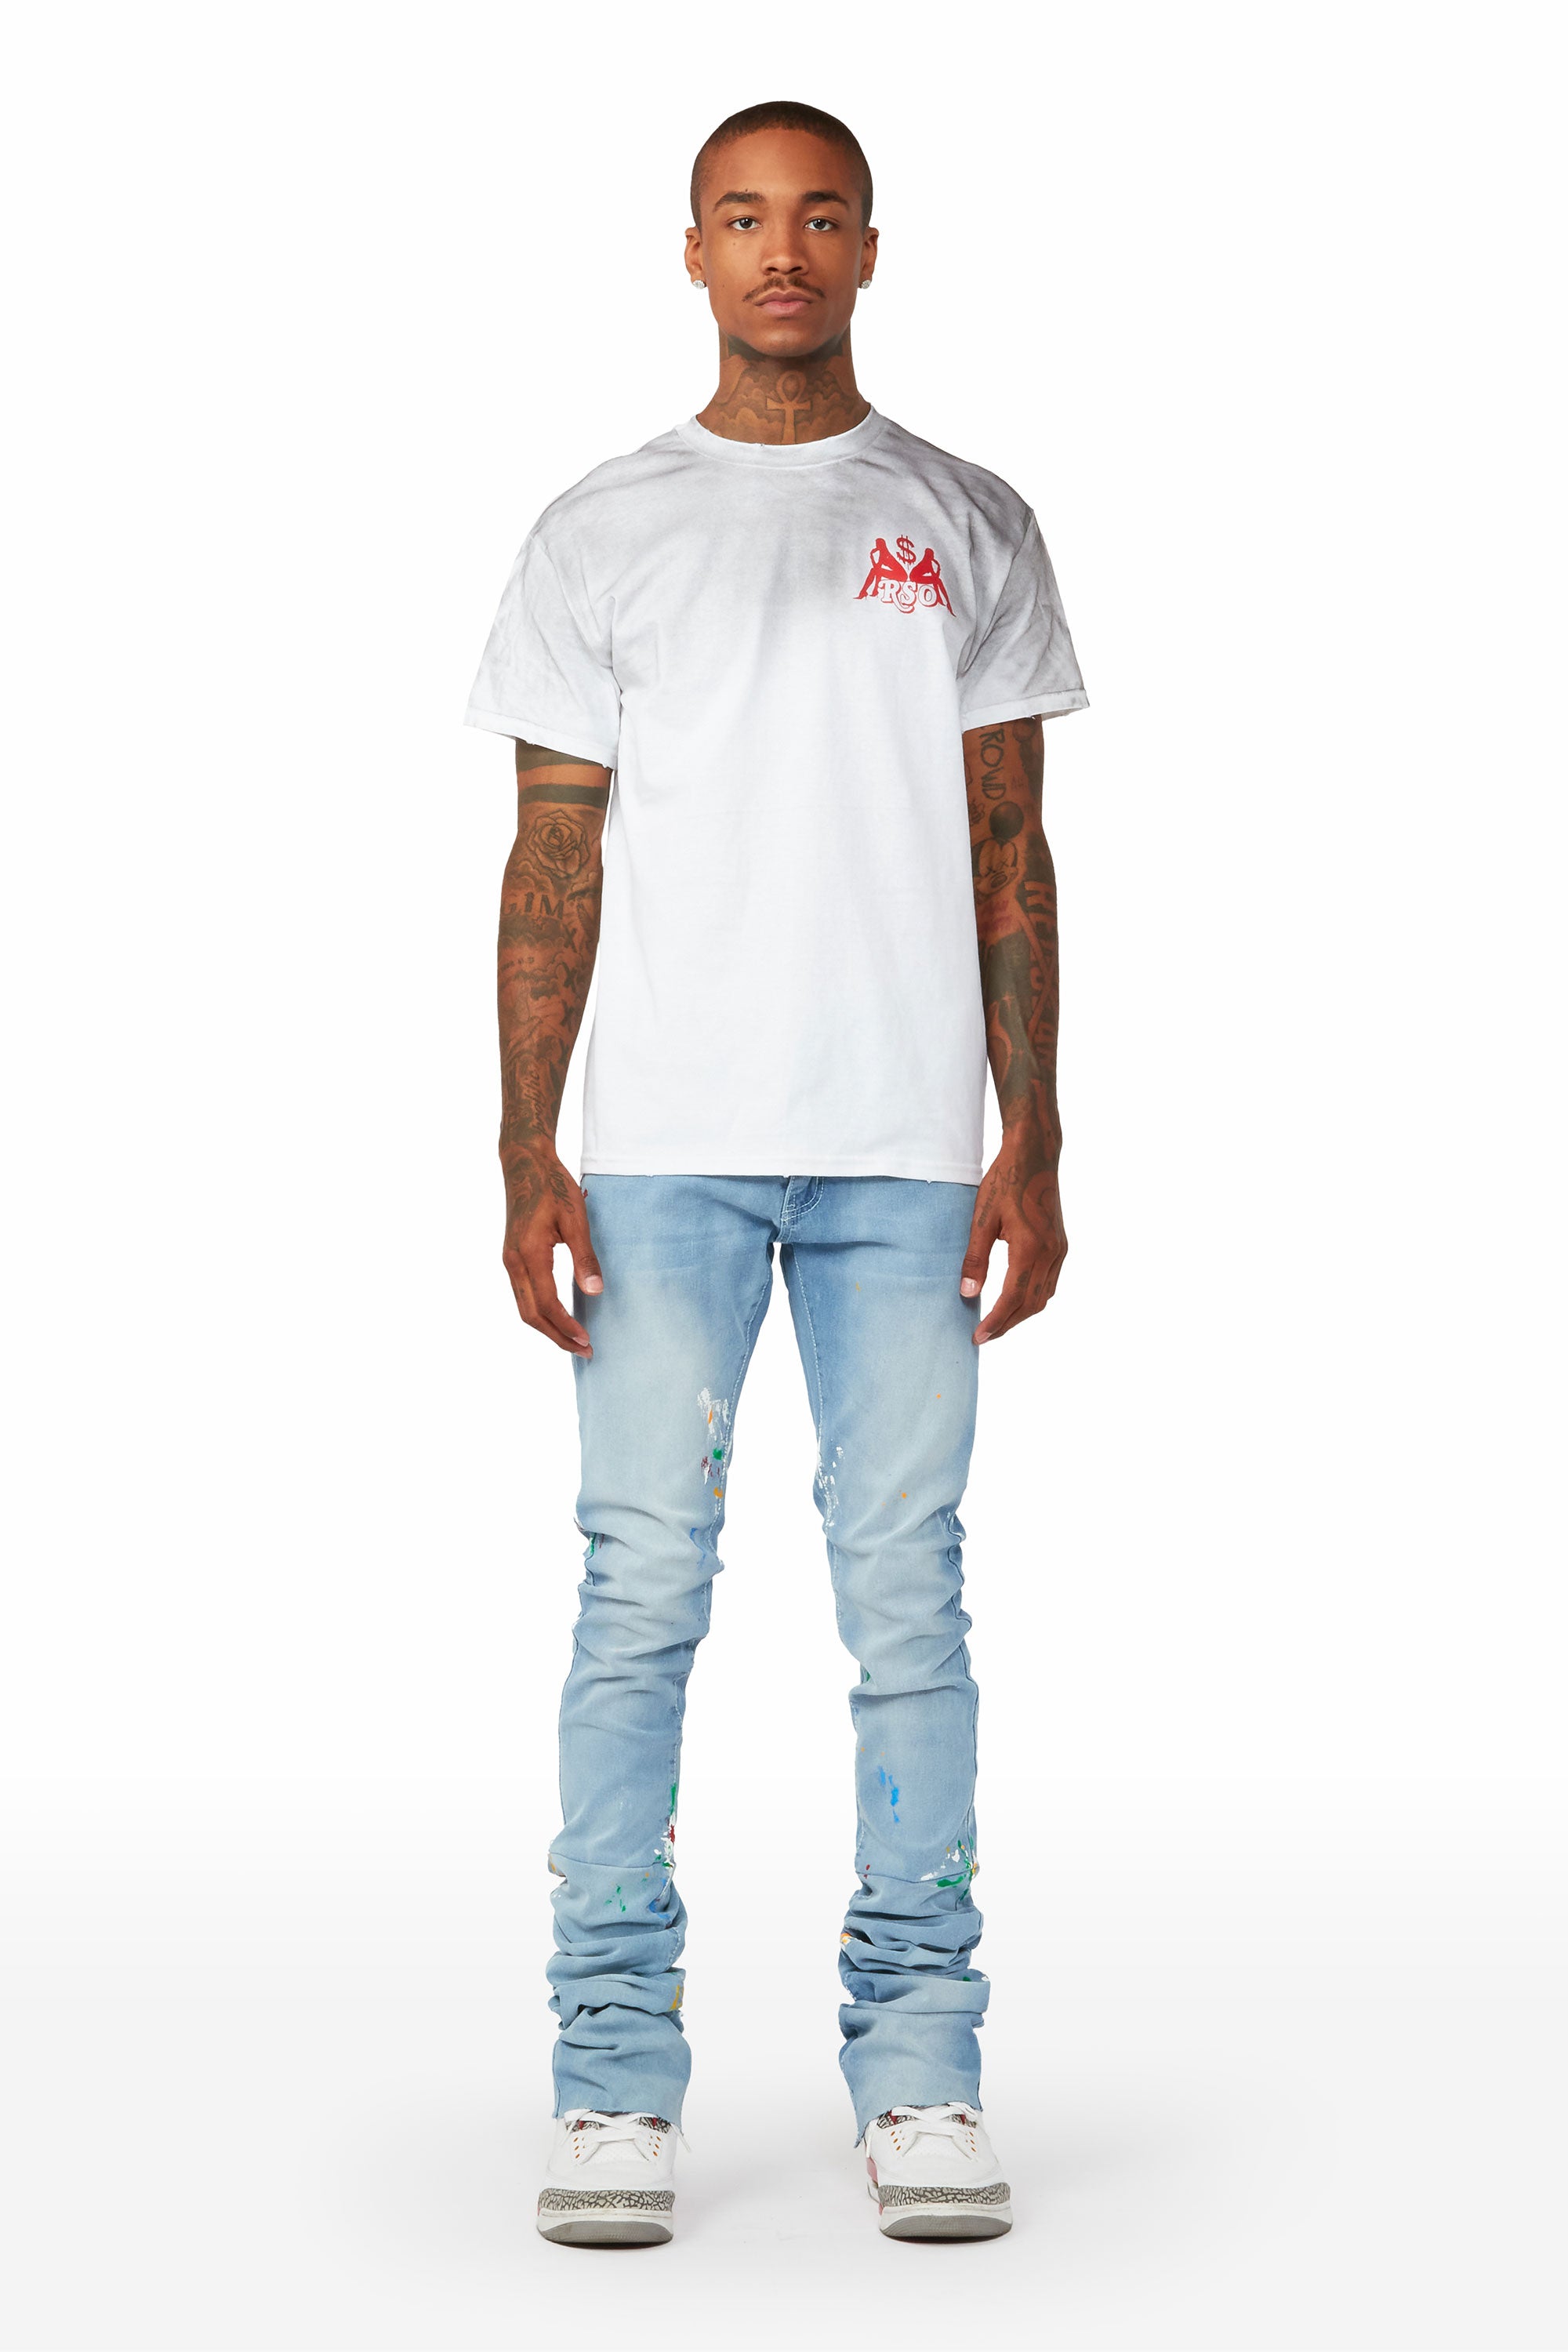 Mitchel Blue Painter Super Stacked Flare Jean